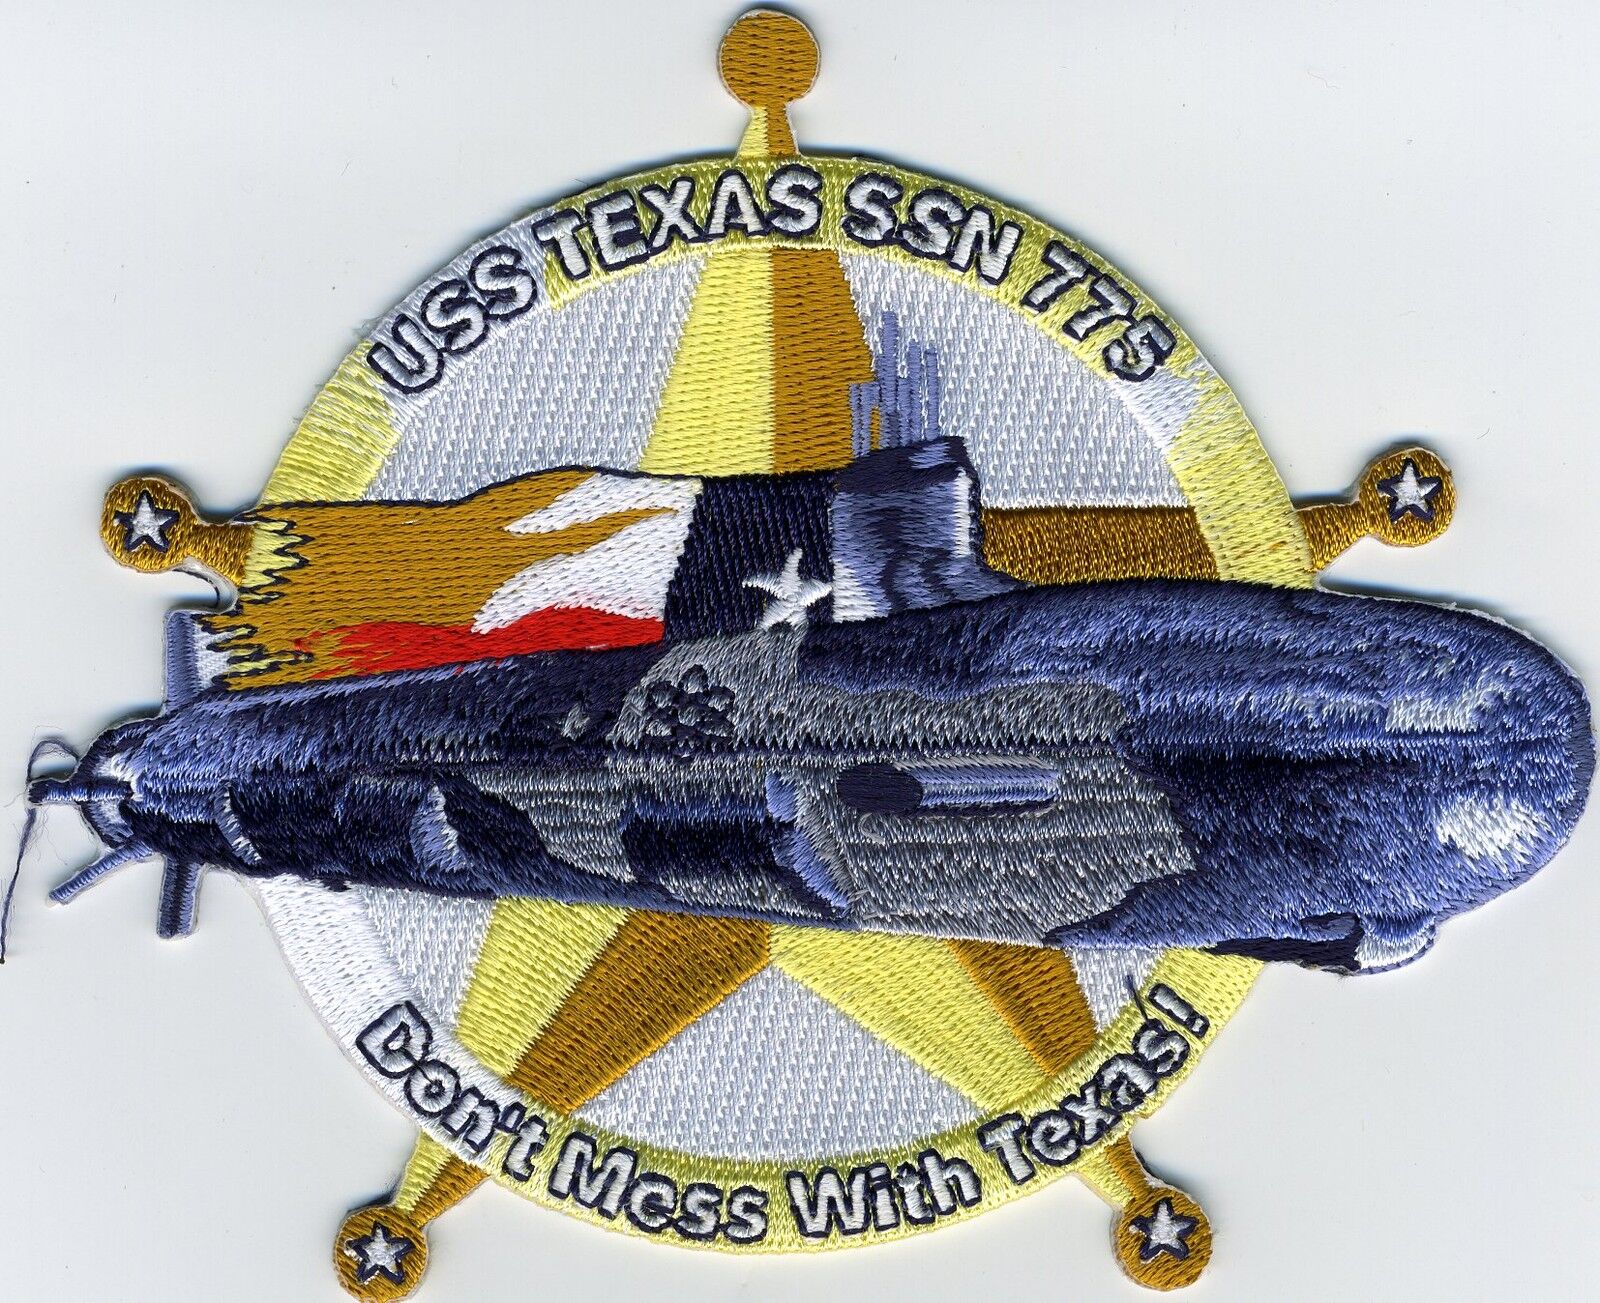 USS Texas SSN 775 - SALE - REDUCED PRICE Submarine Patch - BCP Cat No. c6042